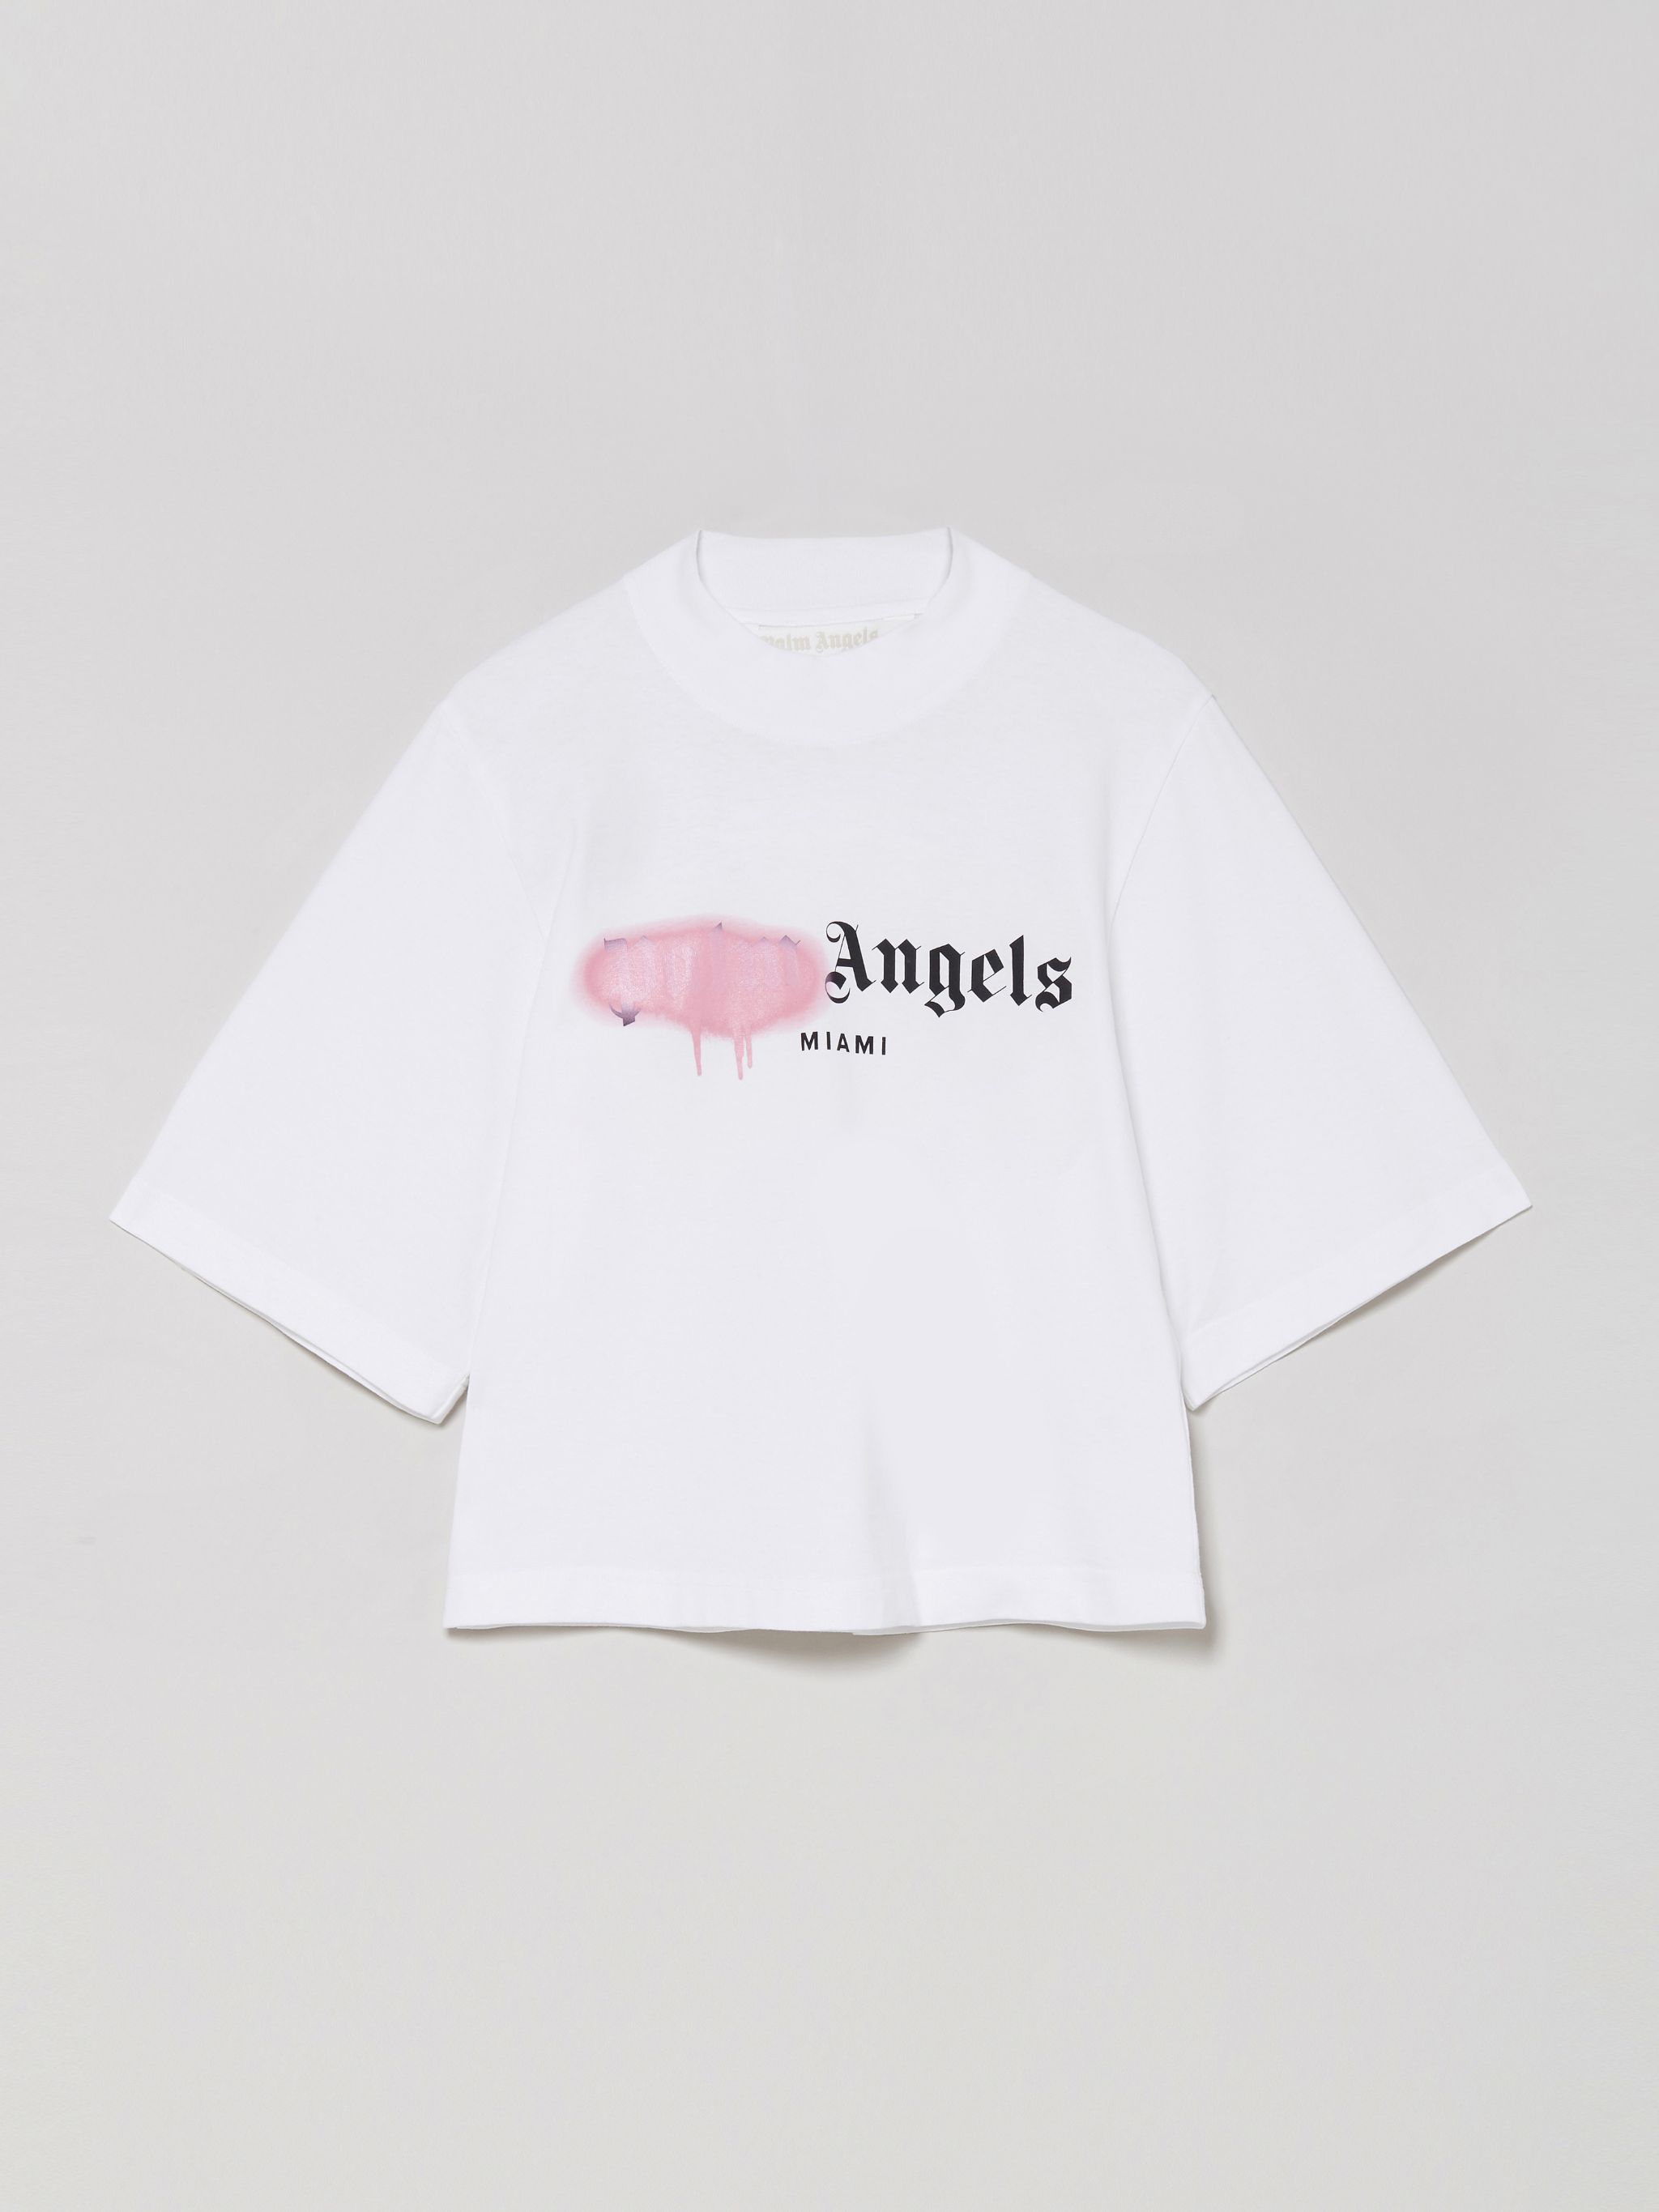 MIAMI SPRAYED LOGO T-SHIRT in white - Palm Angels® Official